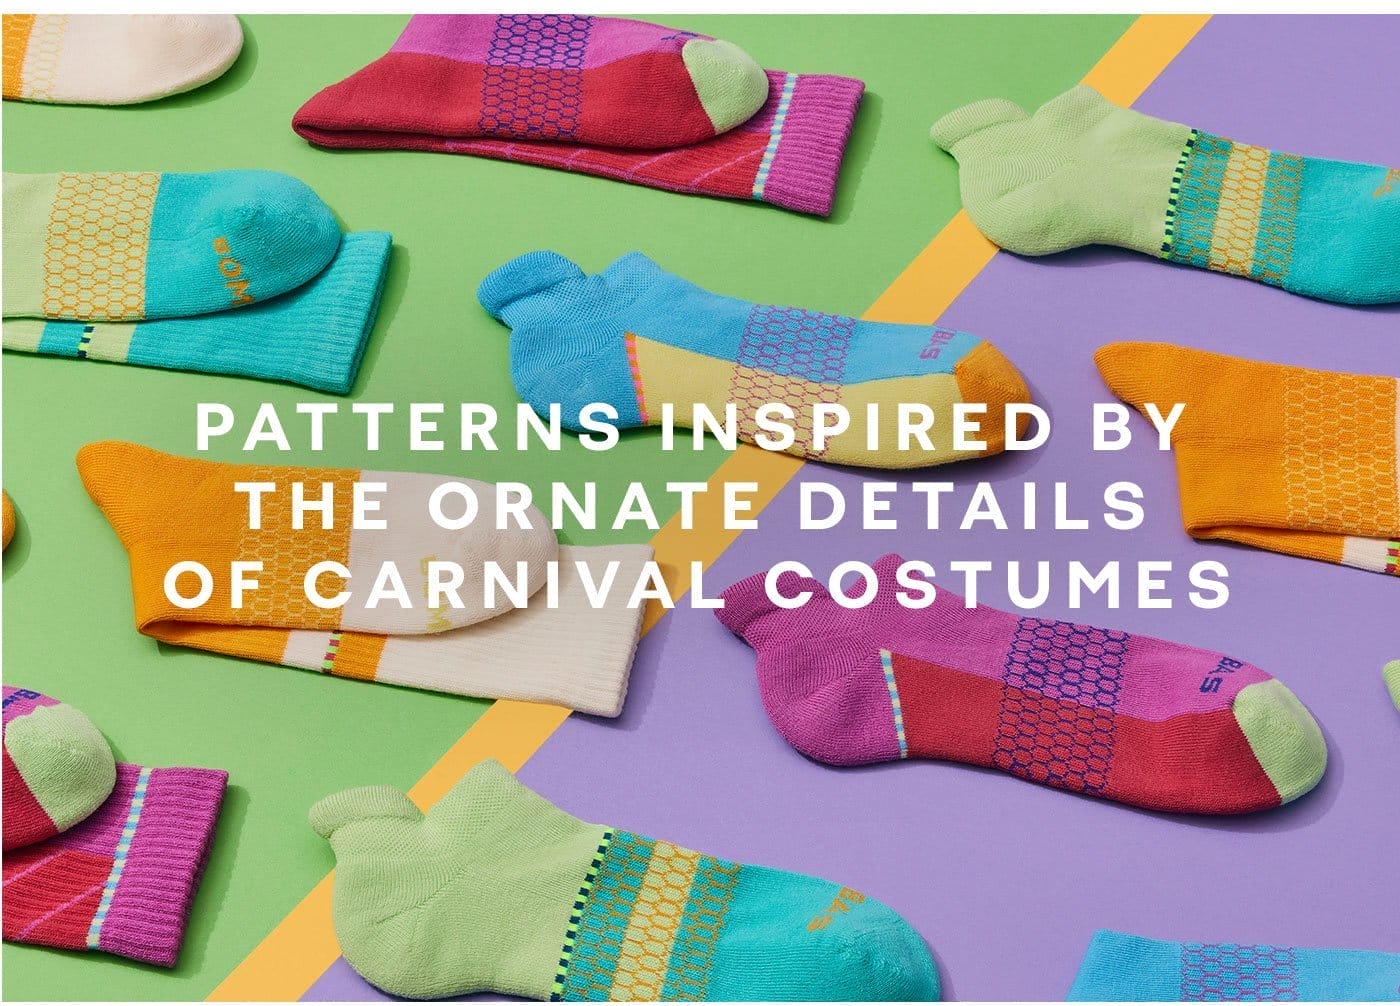 PATTERNS INSPIRED BY THE ORNATE DETAILS OF CARNIVAL COSTUMES